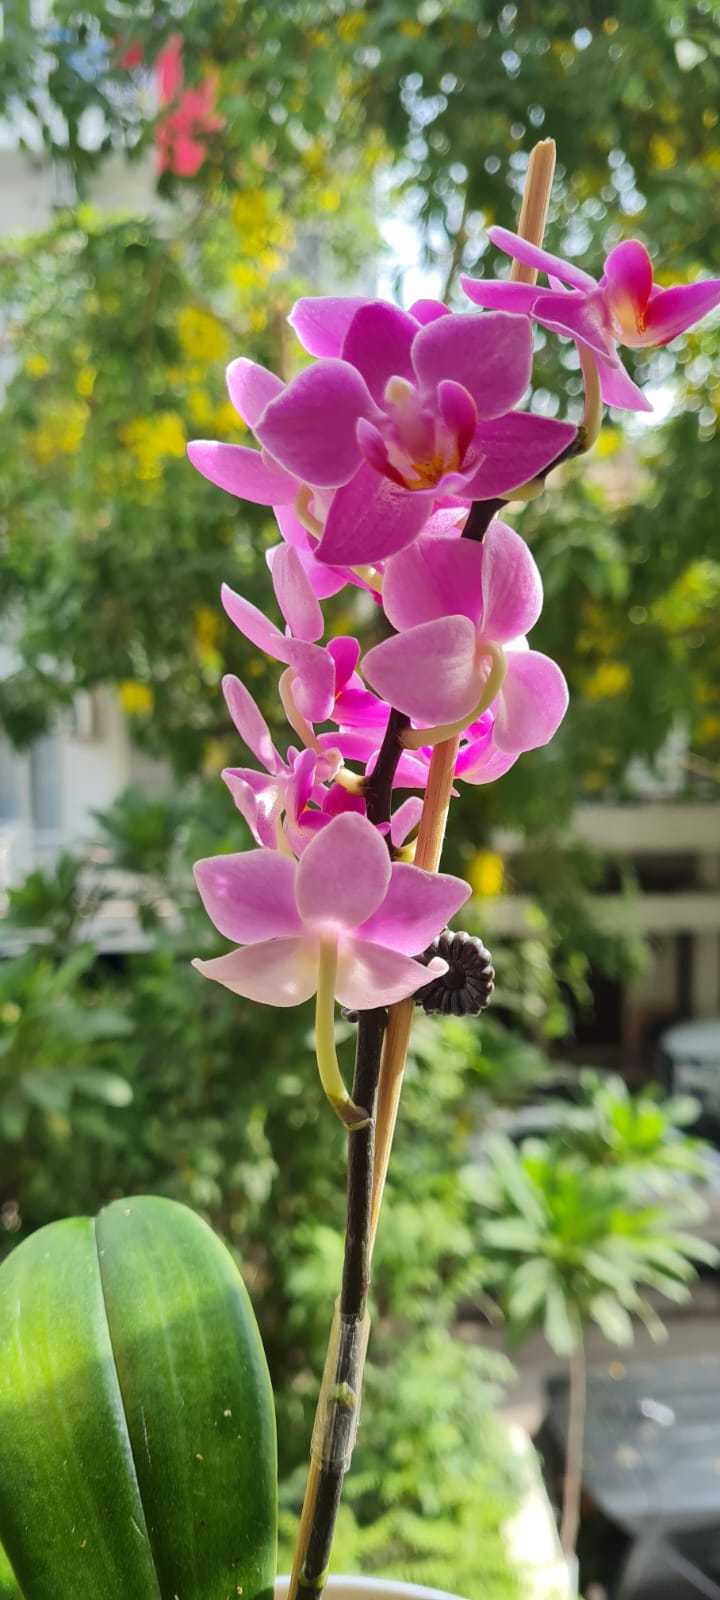 Tips for growing orchids at home